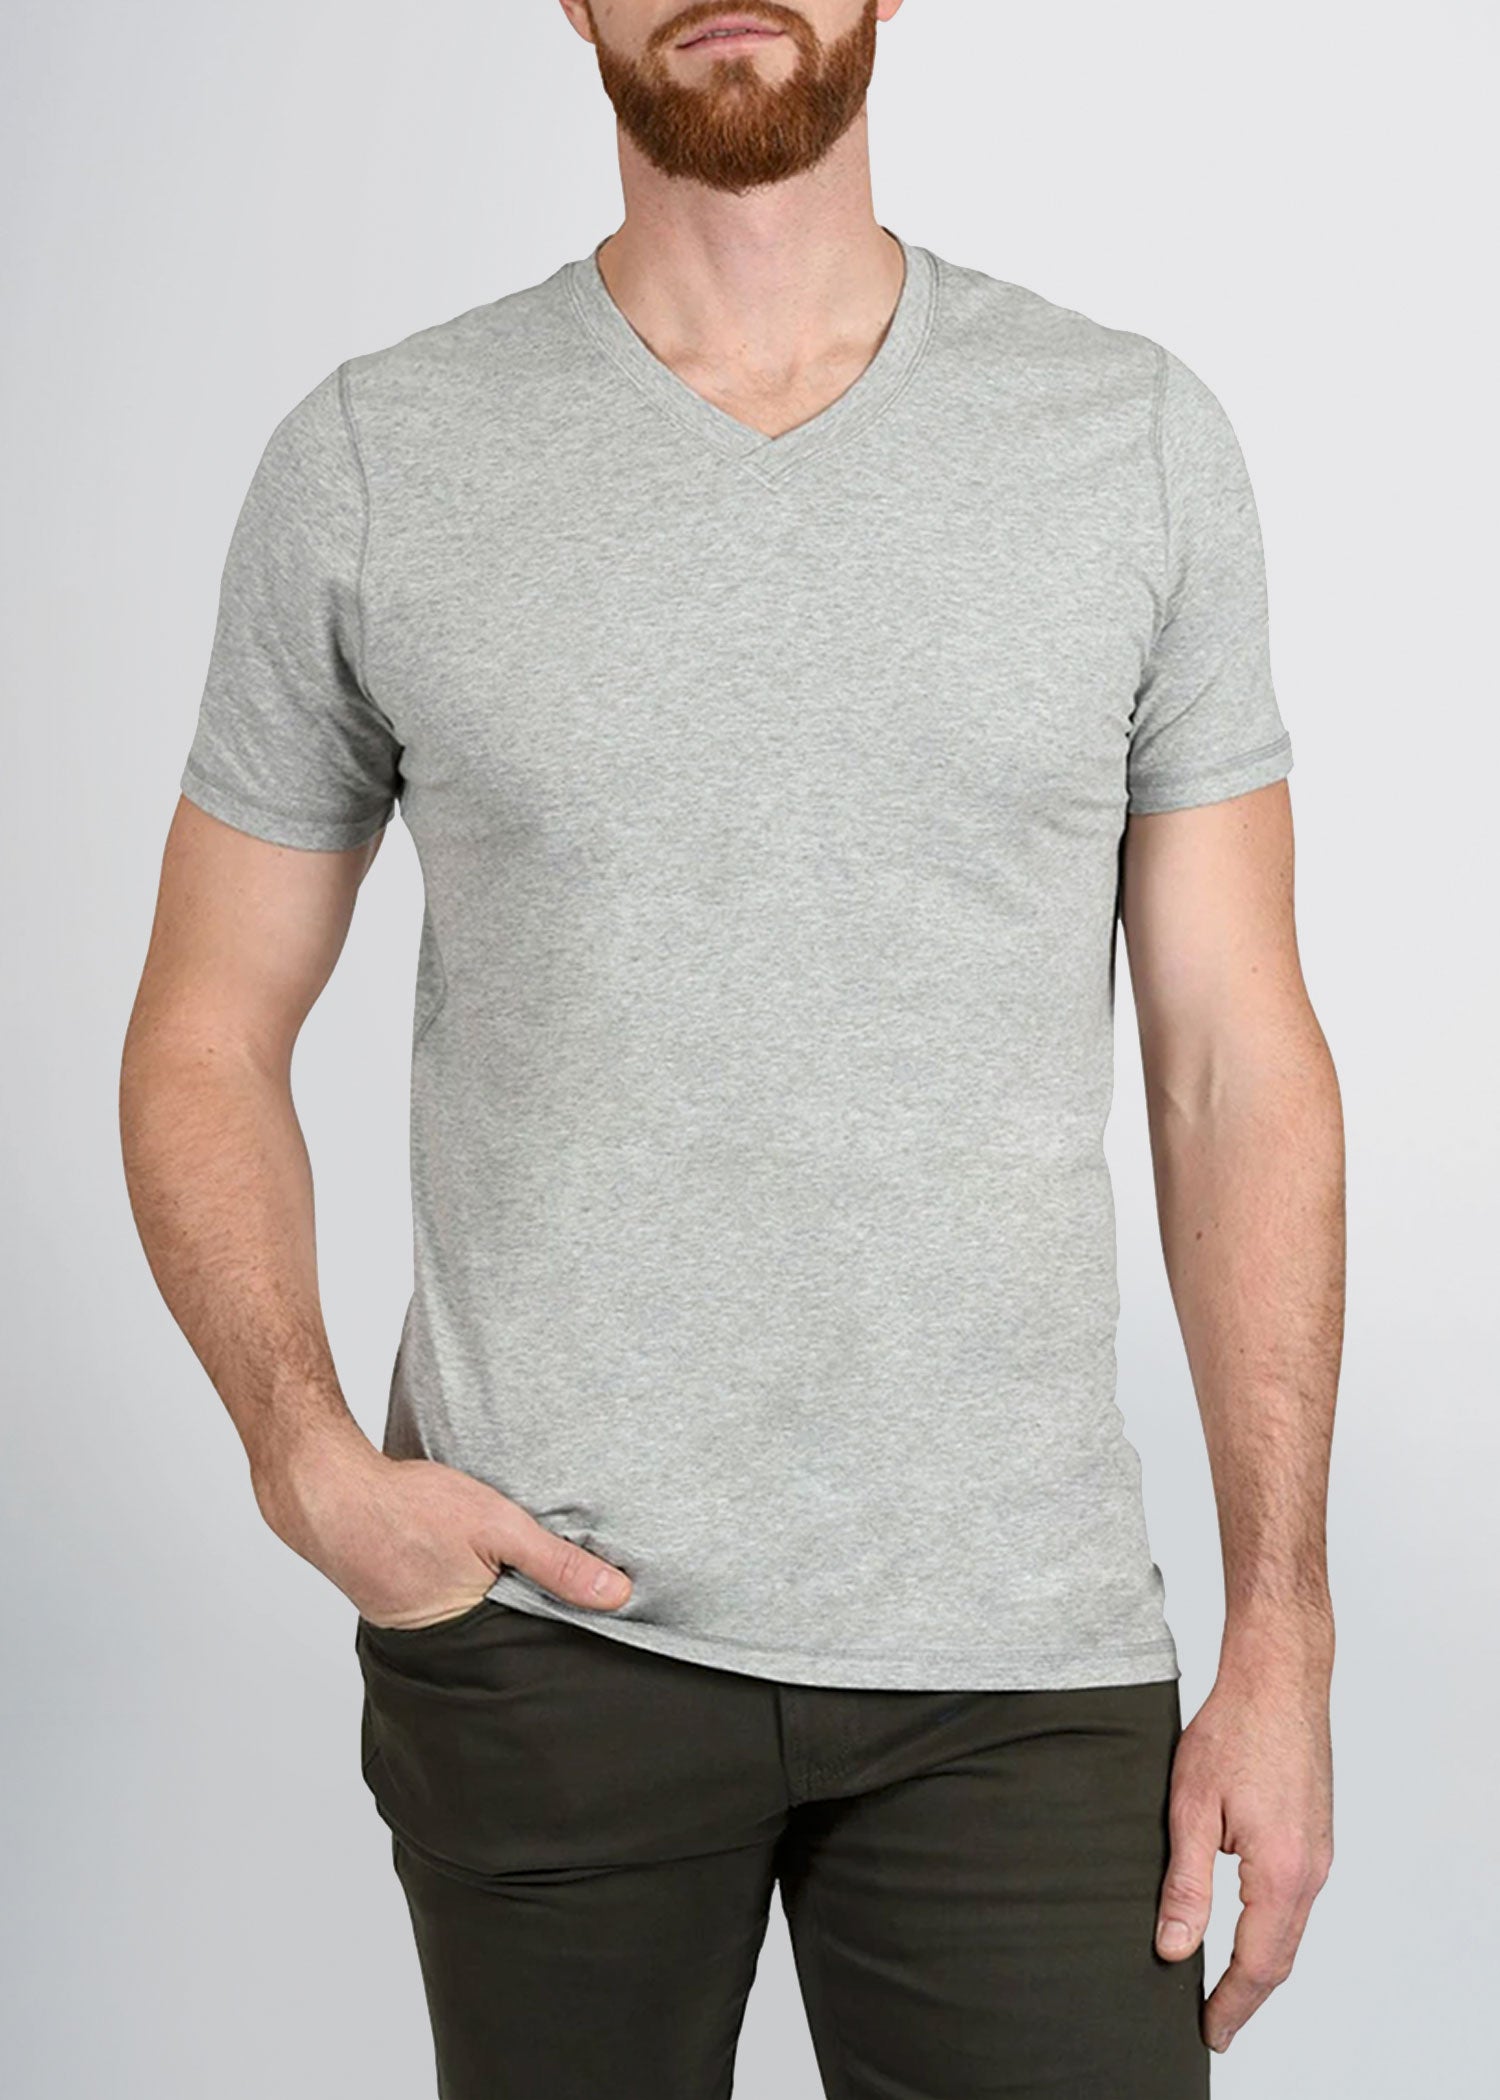 american-tall-mens-essential-slimfit-vneck-tee-greymix-front